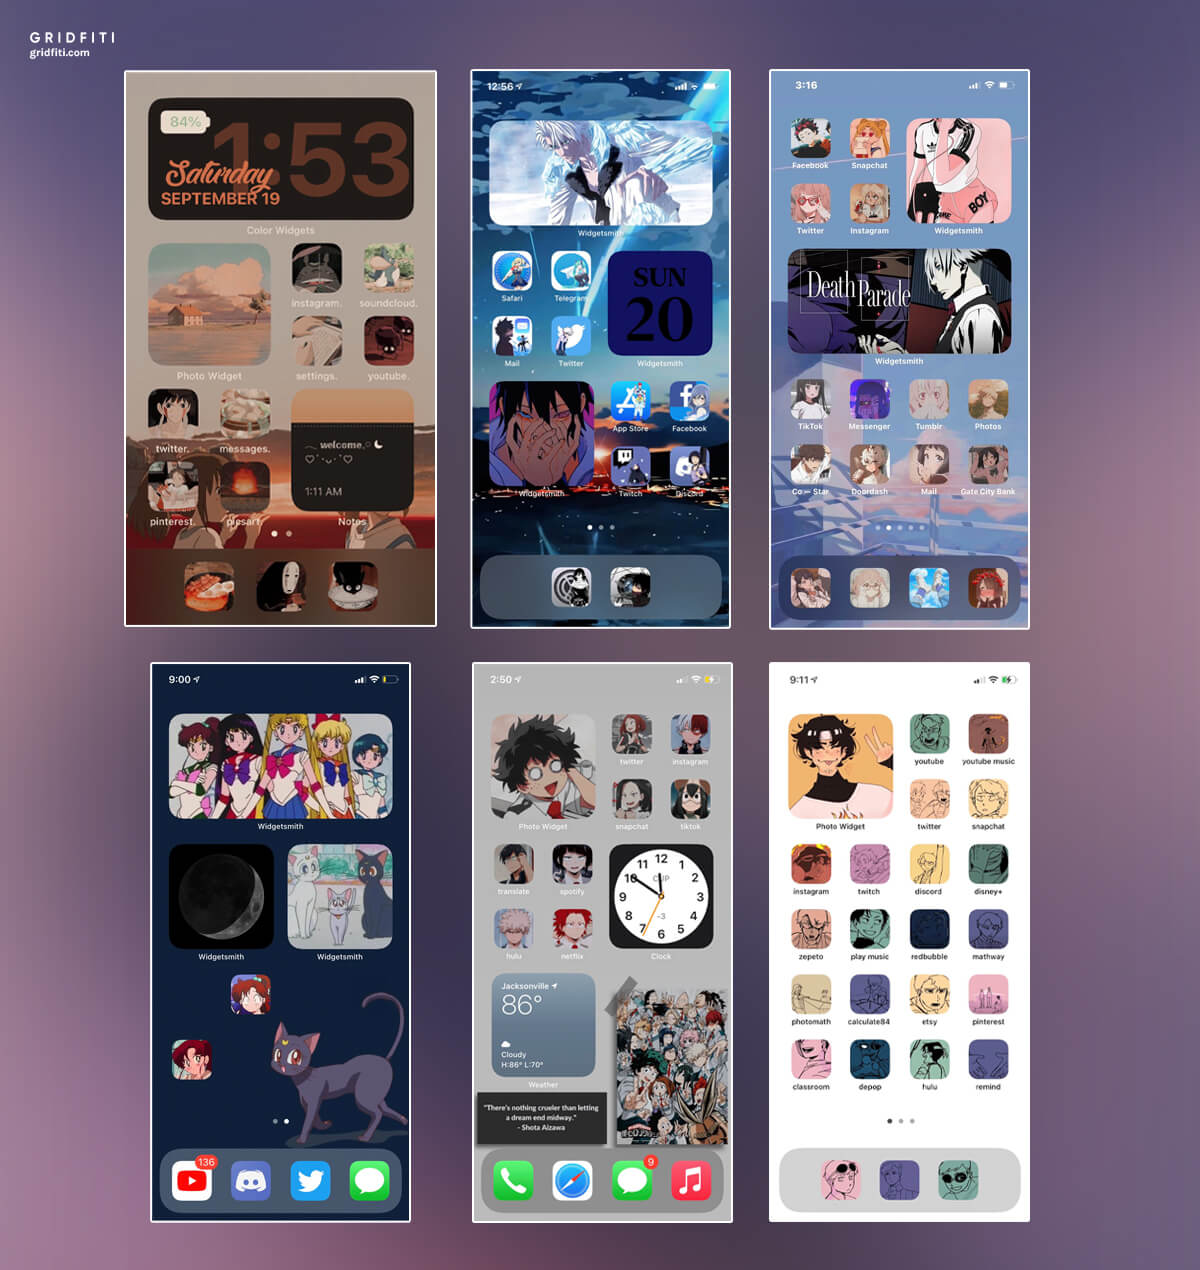 30 Aesthetic Ios 14 Home Screen Theme Ideas Gridfiti How to trick out your iphone home screen in ios 14. 30 aesthetic ios 14 home screen theme